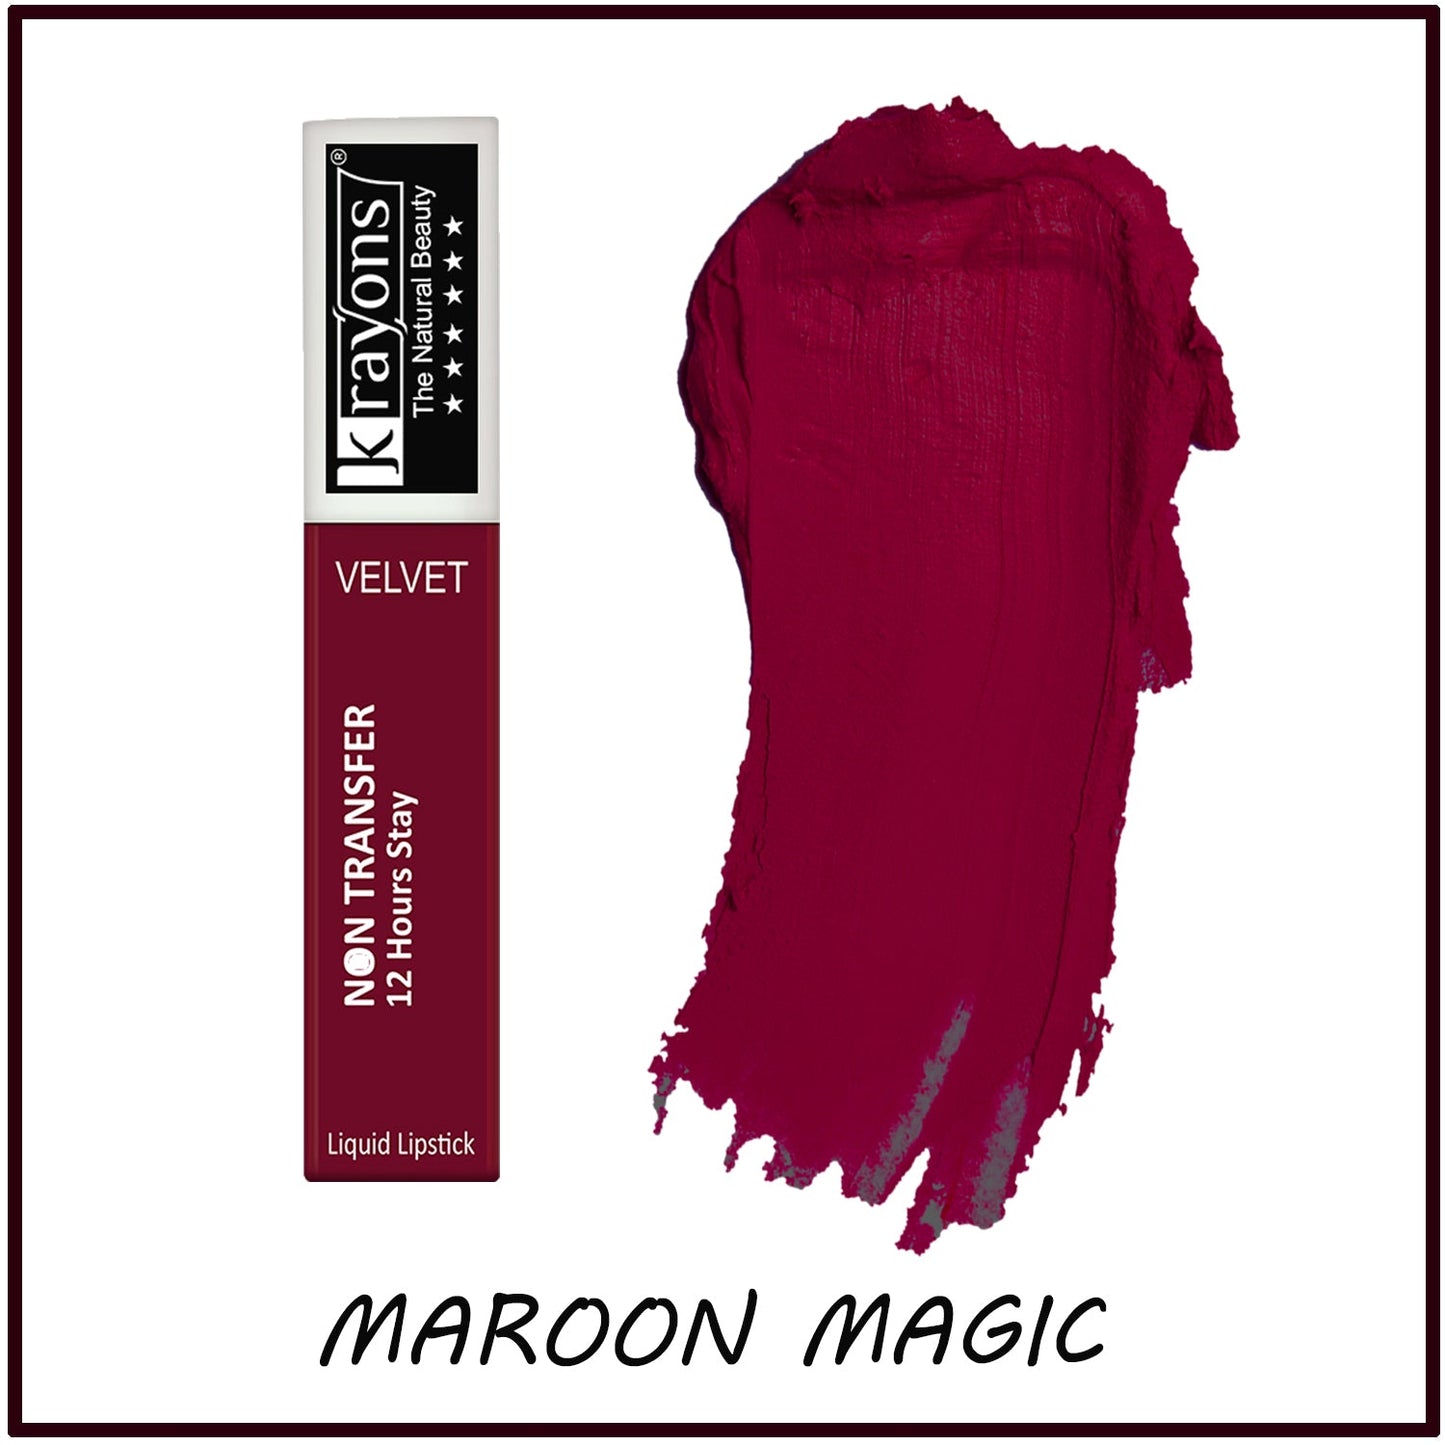 Krayons Power Stay Nontransfer 12hrs Stay Matte Liquid Lipstick, Mask Proof, 4ml Each, Combo, Pack of 2 (Caramel, Maroon Magic)